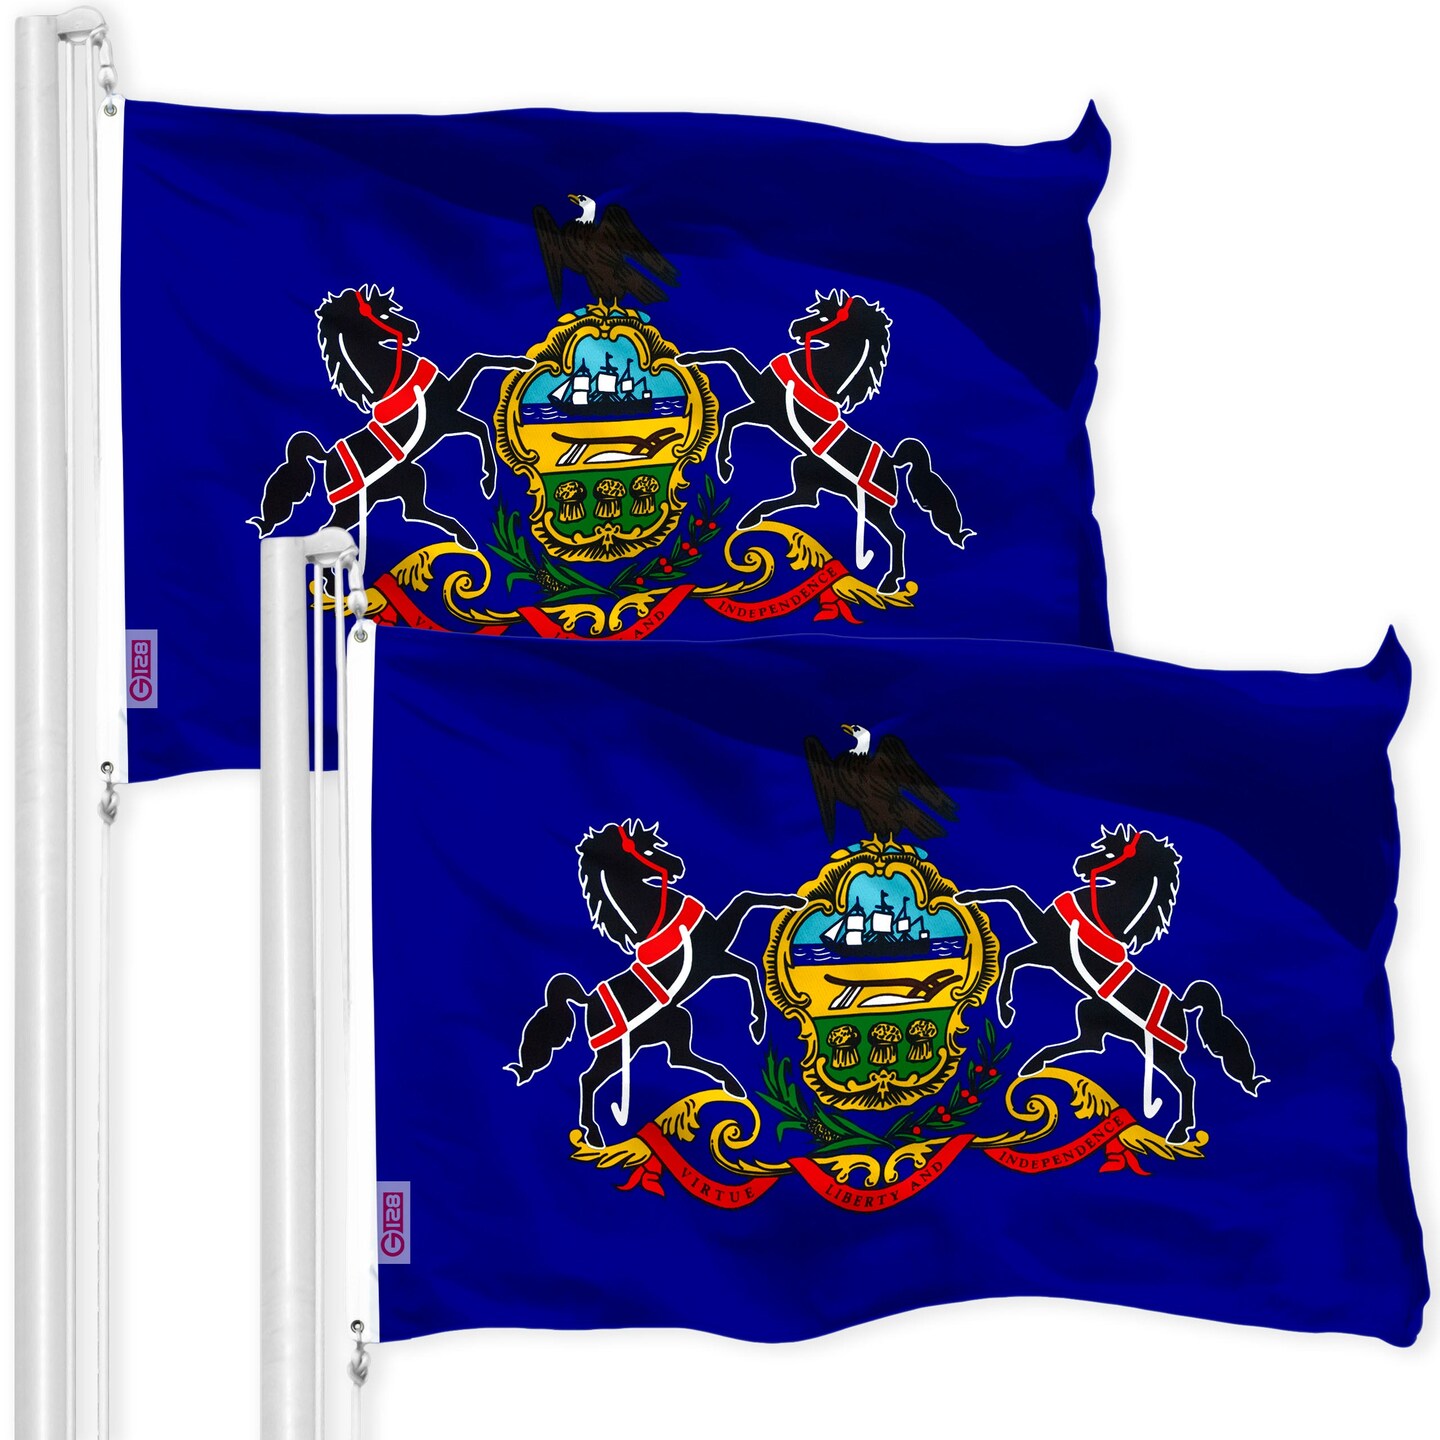 Pennsylvania PA State Flag 3x5 Ft 2-Pack 150D Printed Polyester By G128